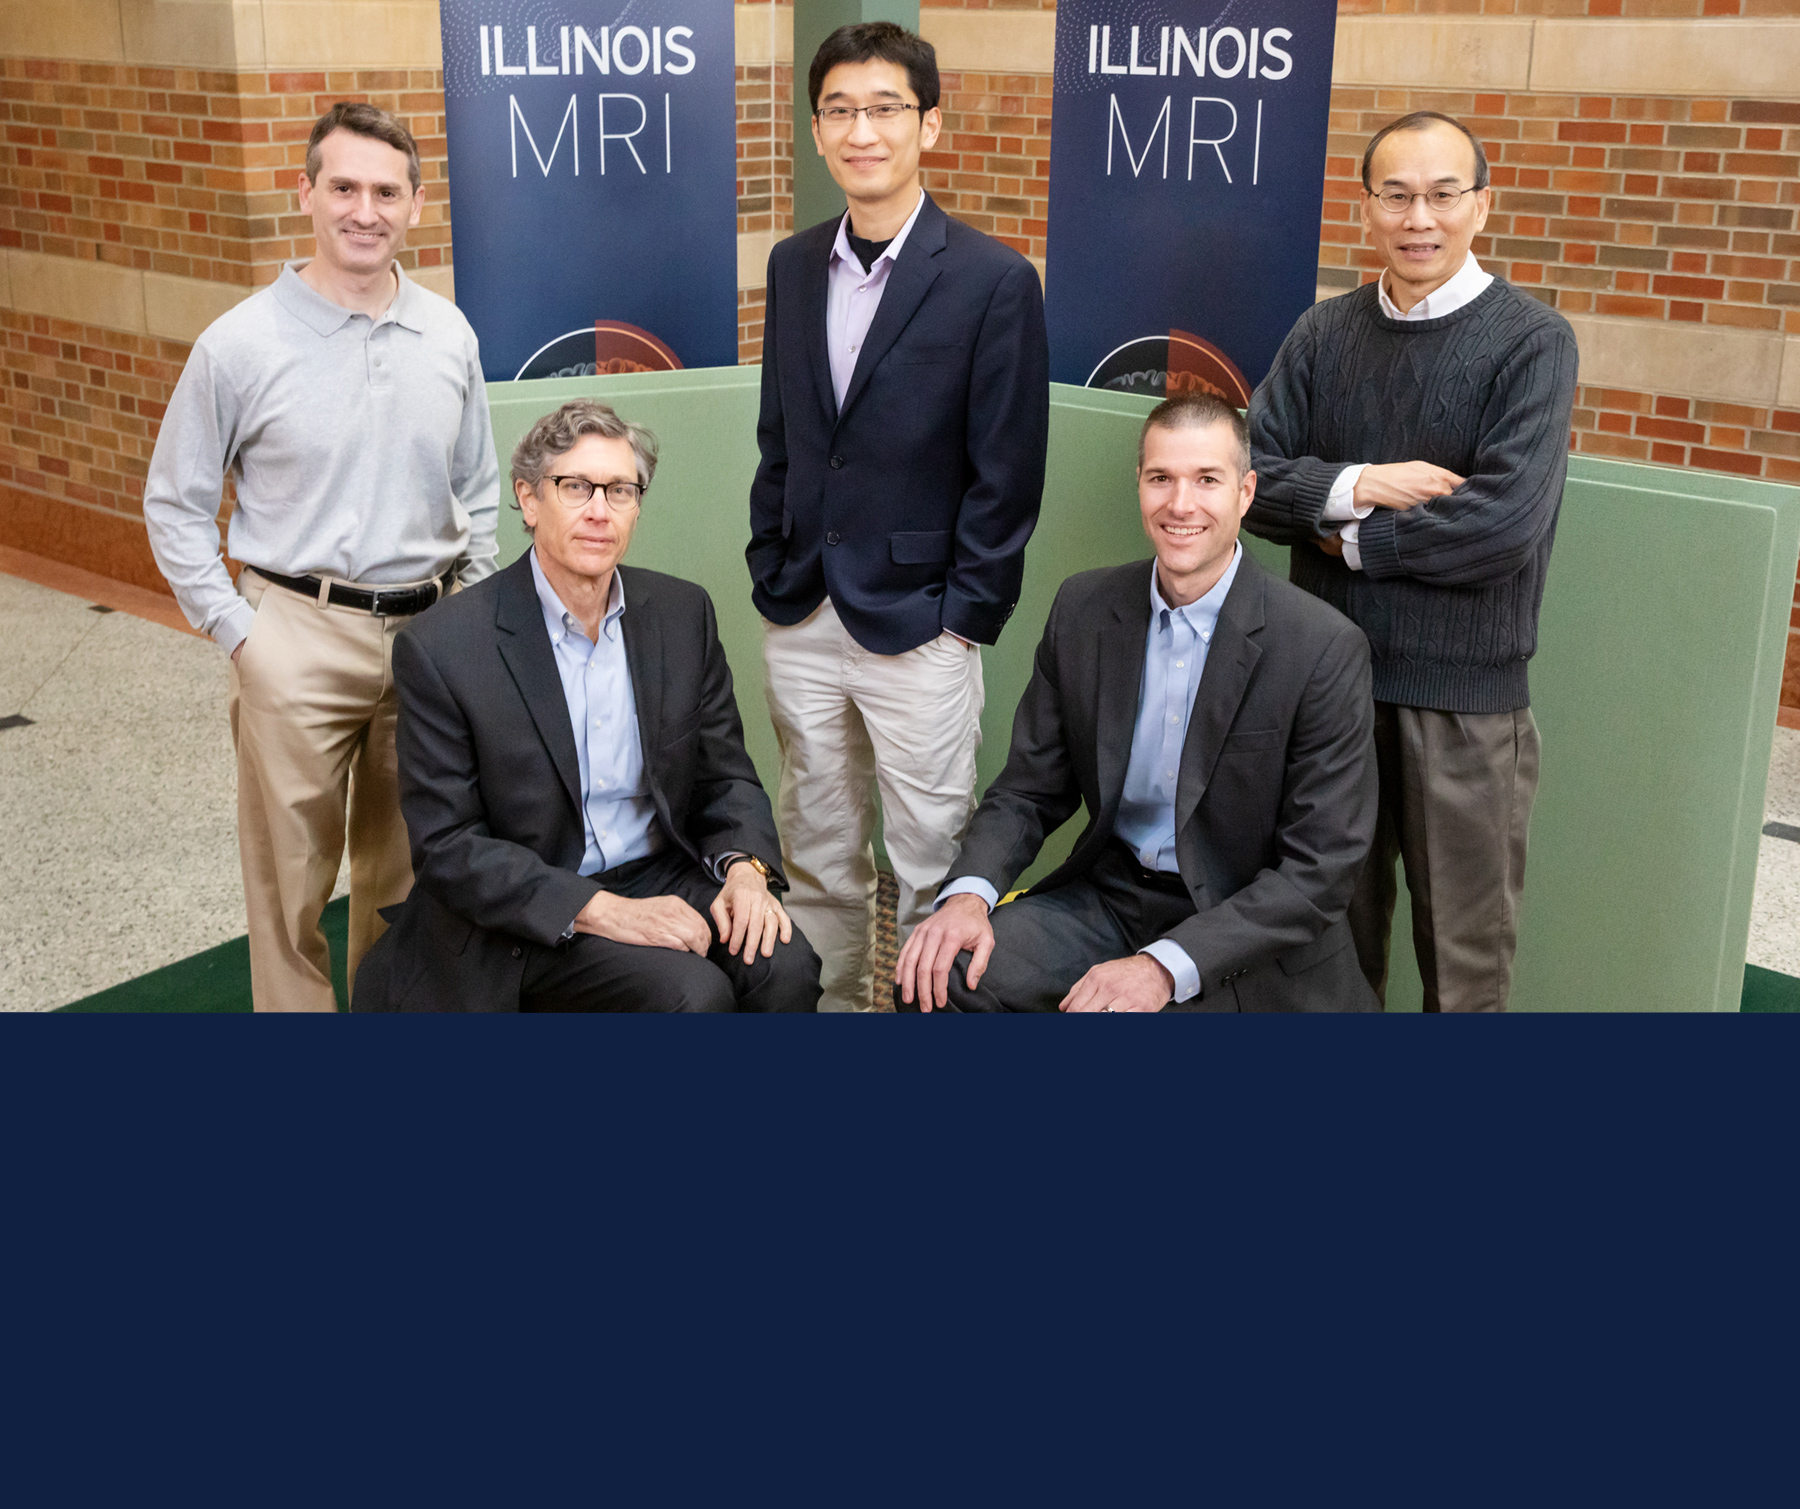 from left, chemistry professor Scott Silverman; entomology professor Gene Robinson, the director of the Carl R. Woese Institute for Genomic Biology; bioengineering professor Fan Lam; animal sciences professor Ryan Dilger; and electrical and computer engineering professor Zhi-Pei Liang. Photo by Brian Stauffer